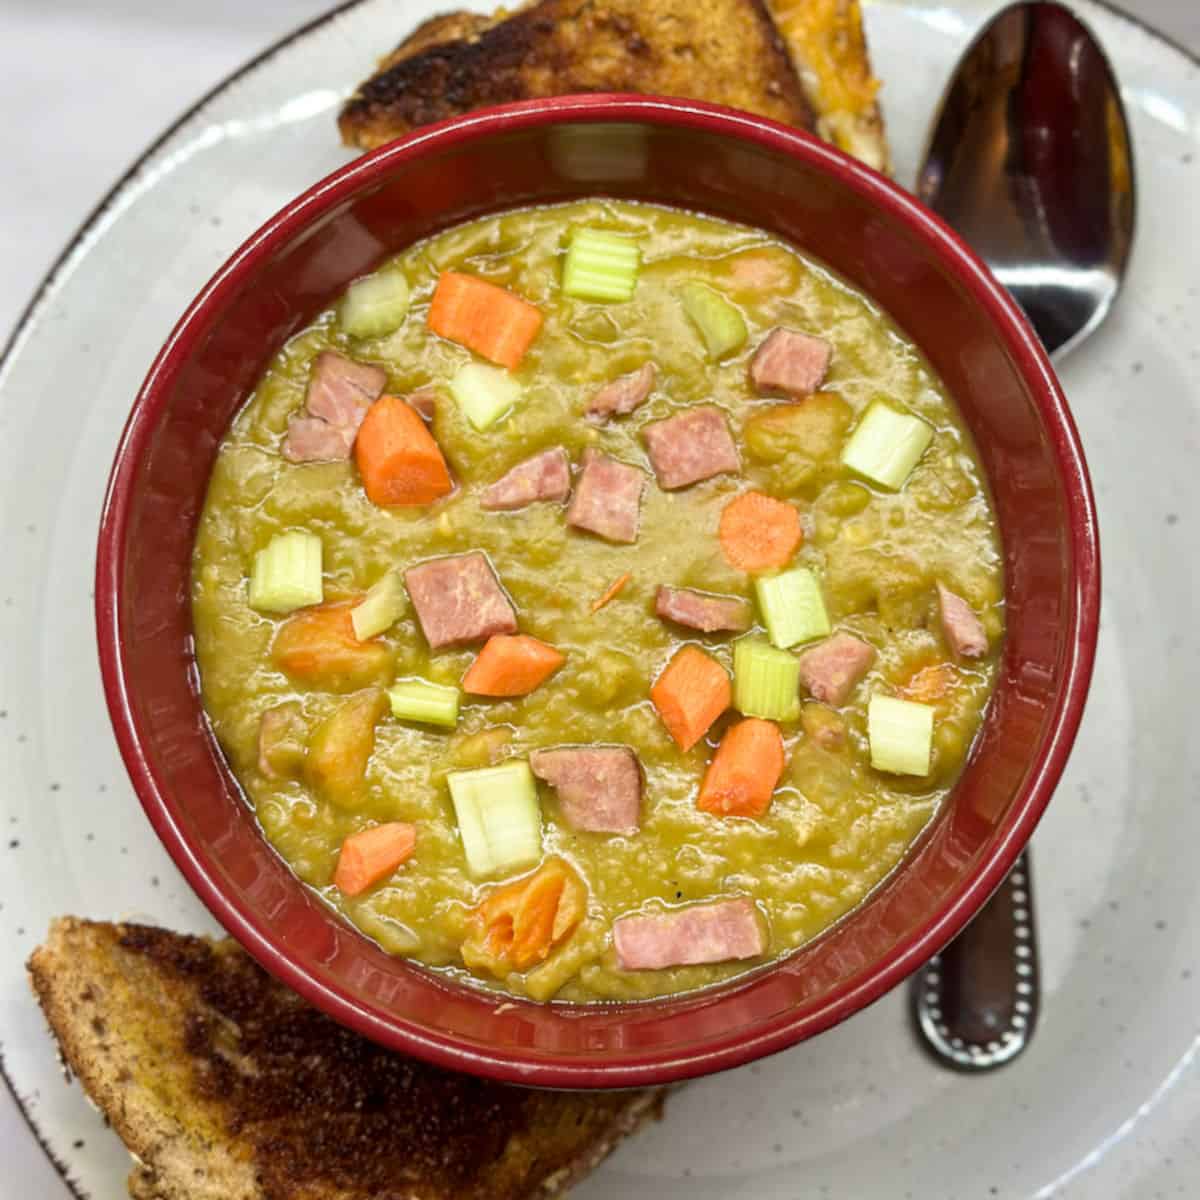 a red bowl on an of white plate with brown outline and a corner cut grilled cheese sandwich halves at the top and bottom of the plate and a silver spoon on the right. the bowl is filled with a thick pea green soup with ham, carrot and celery chunks sprinkled on top